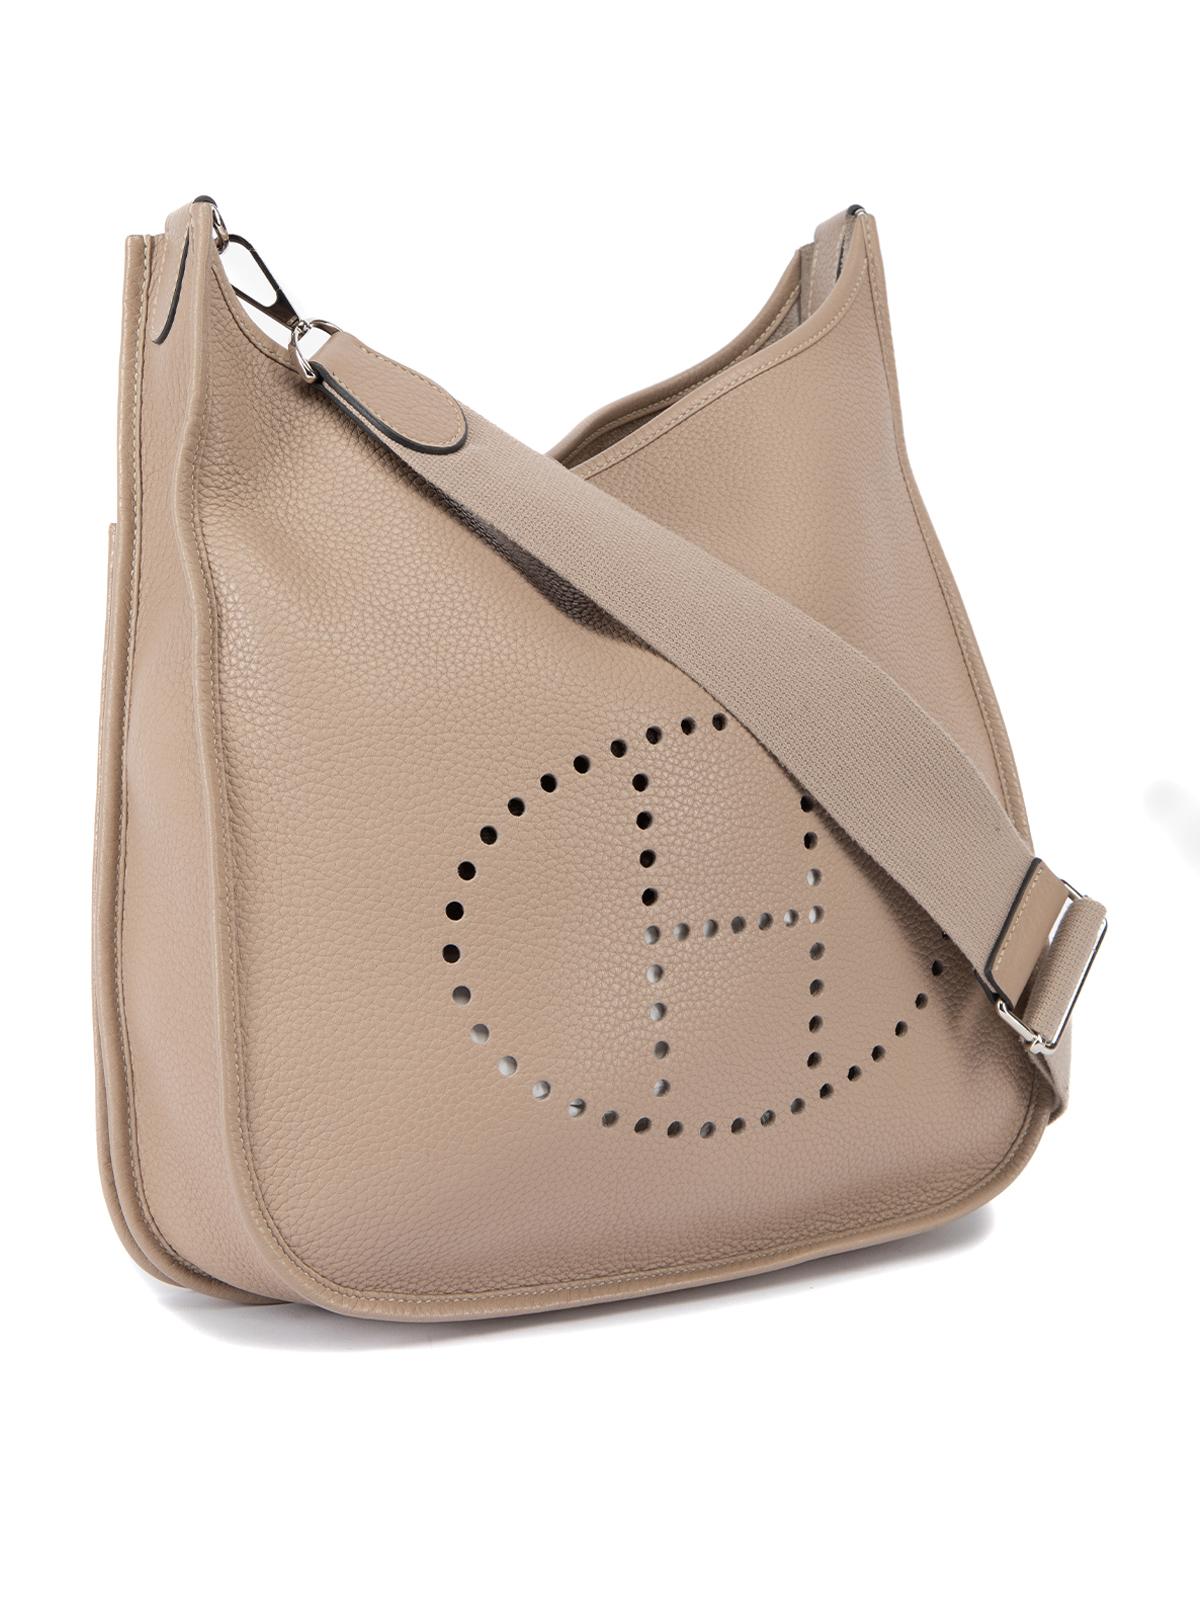 CONDITION is Very good. Hardly any visible wear to bag is evident on this used Hermes designer resale item. This item comes with the original dustbag. Details Beige Leather Crossbody bag Signature perforated H logo on front Strap and press-stud